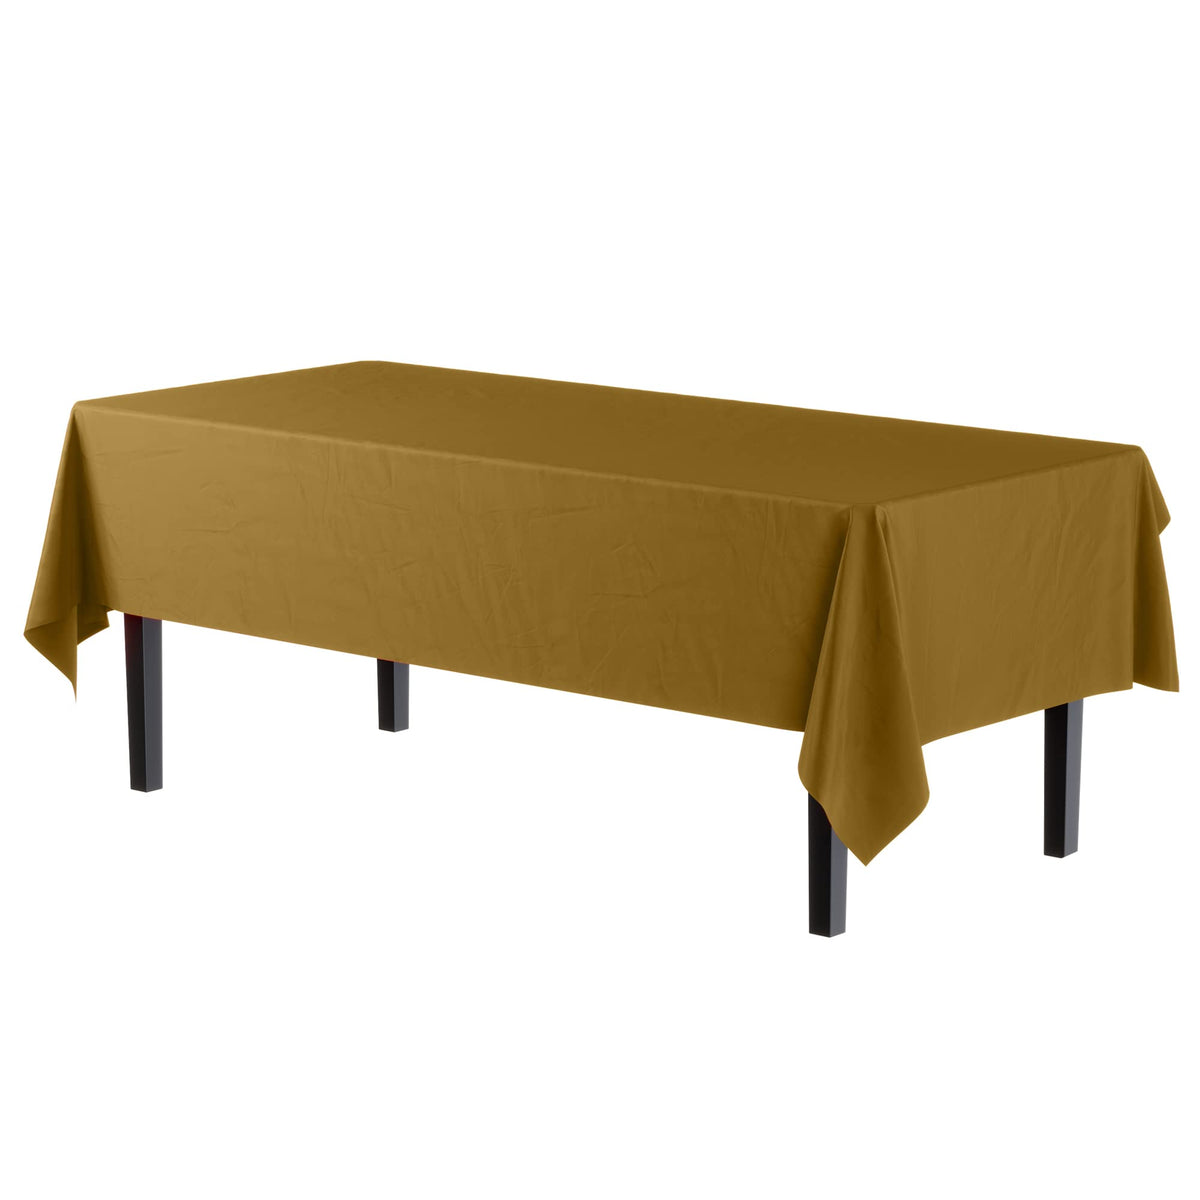 Gold plastic Table Cover